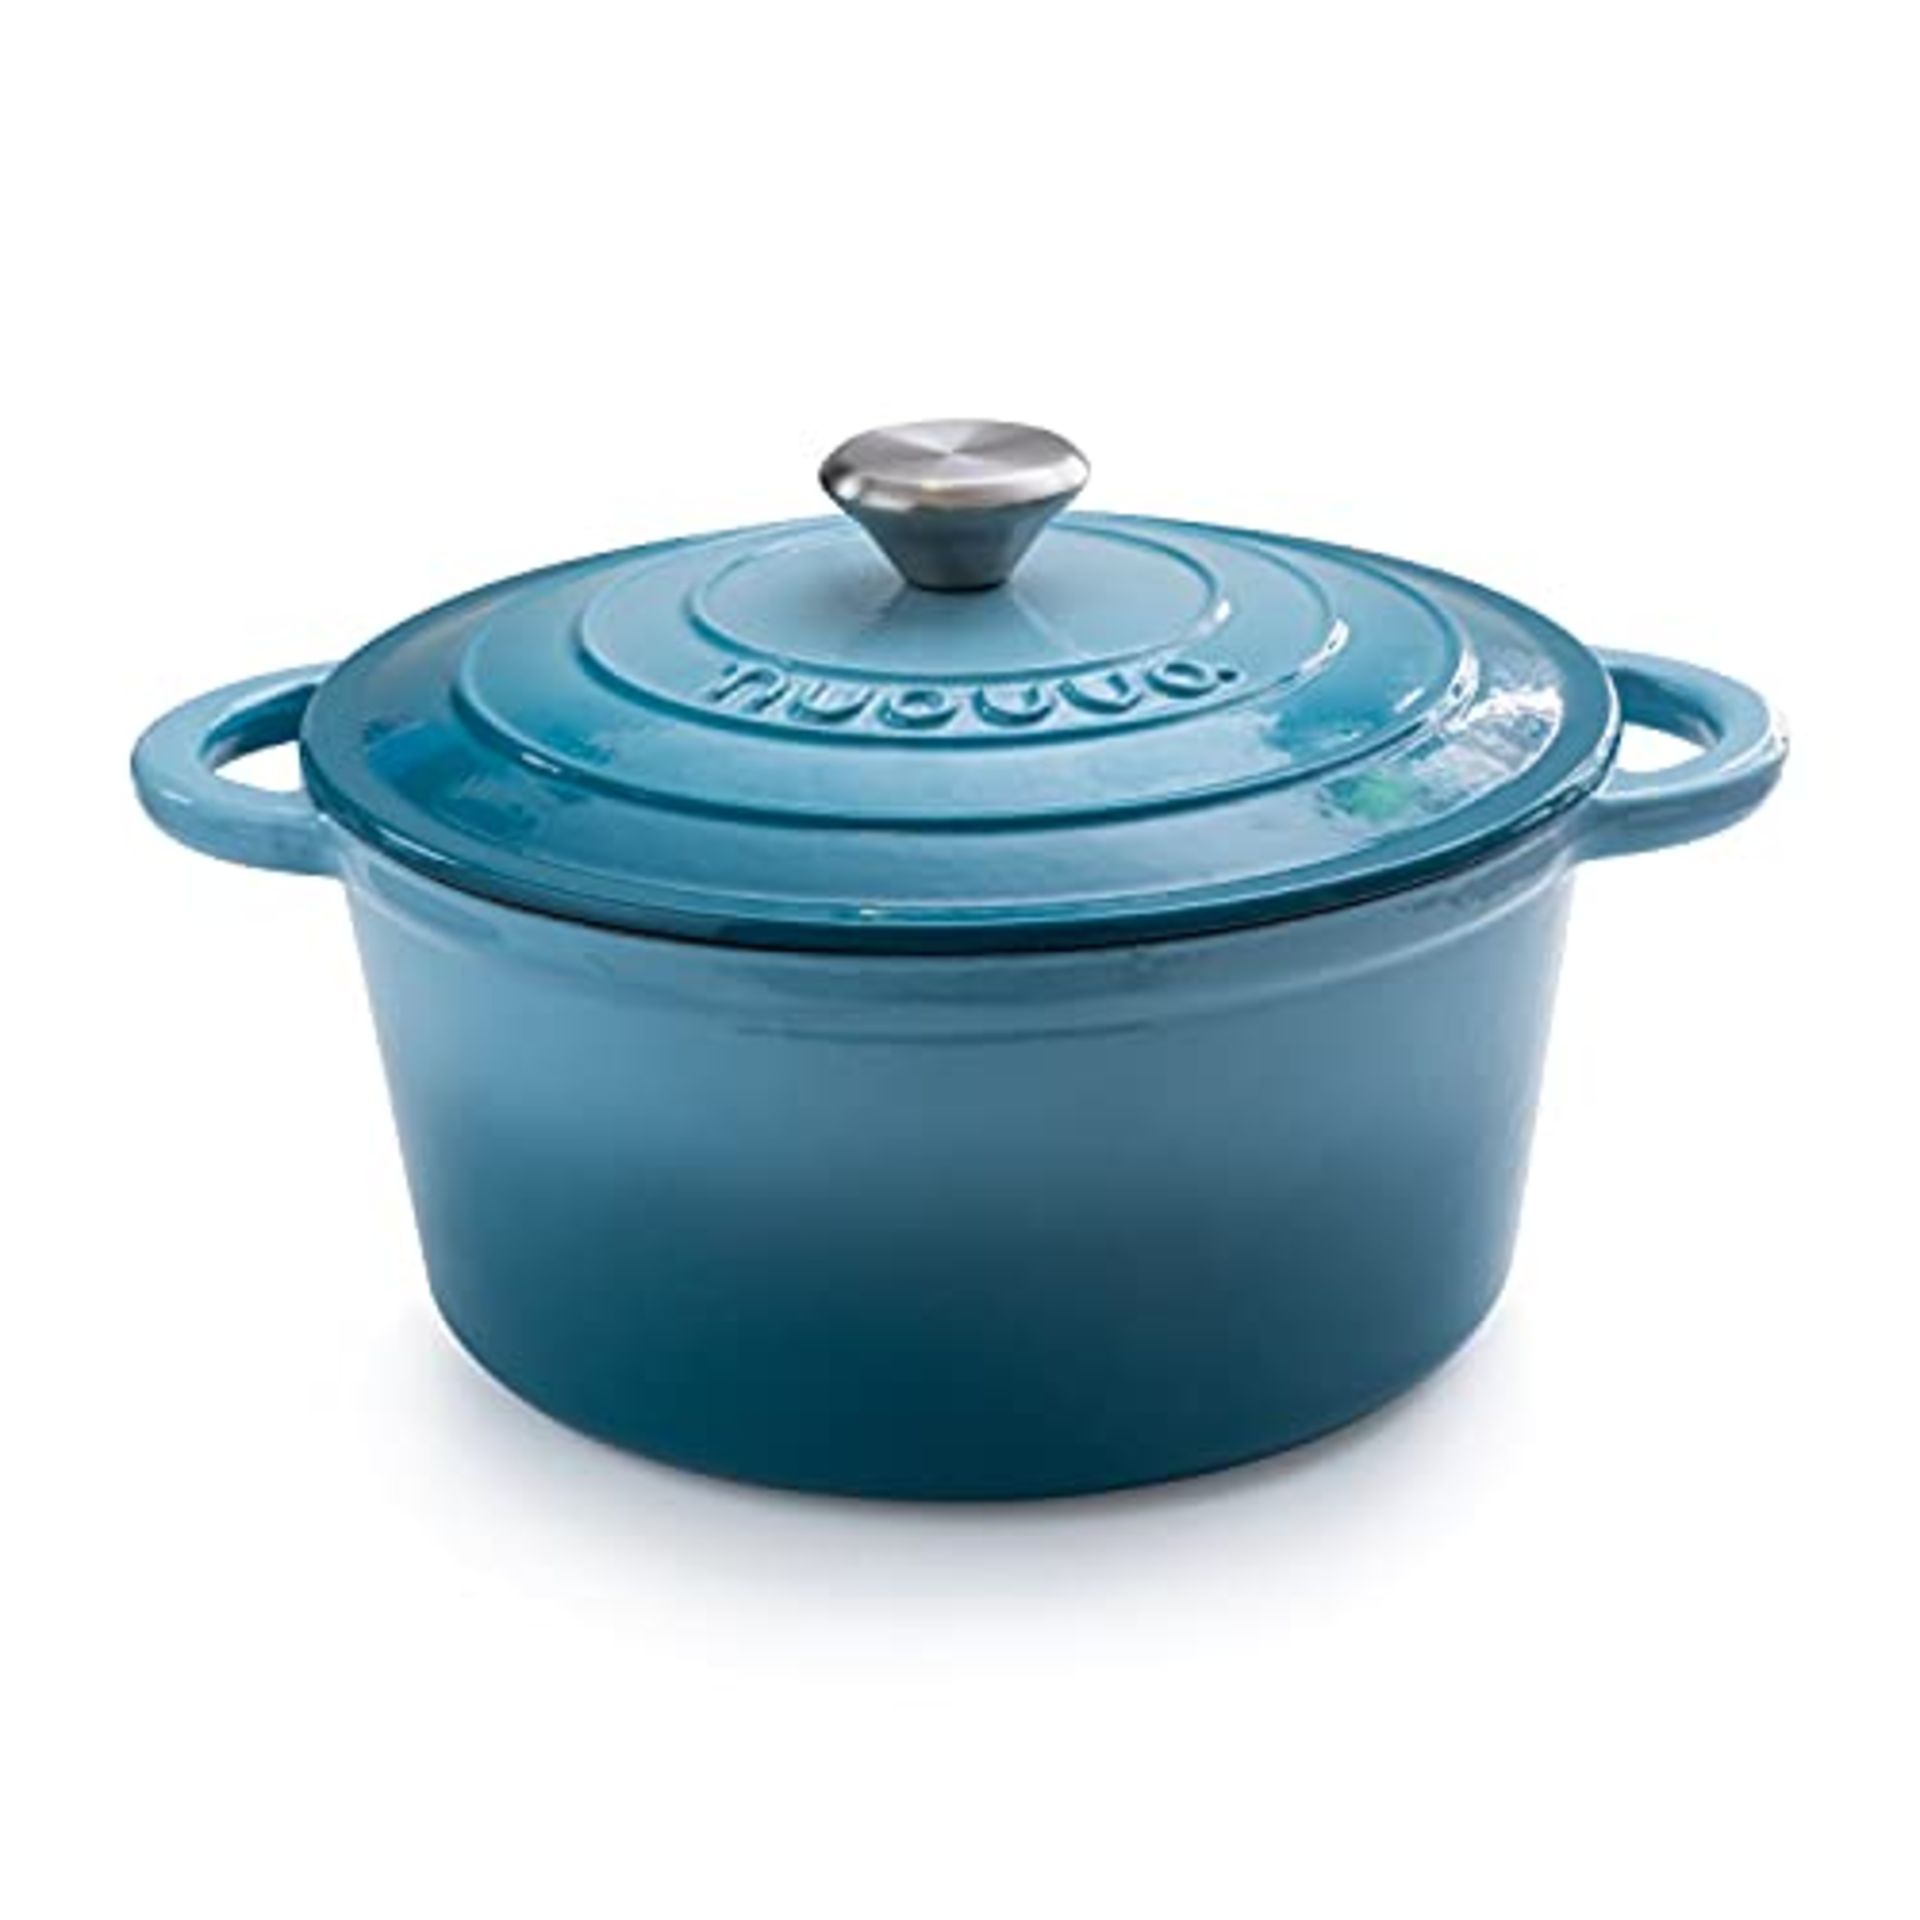 RRP £44.65 Cast Iron Pot with Lid Non-Stick Ovenproof Enamelled